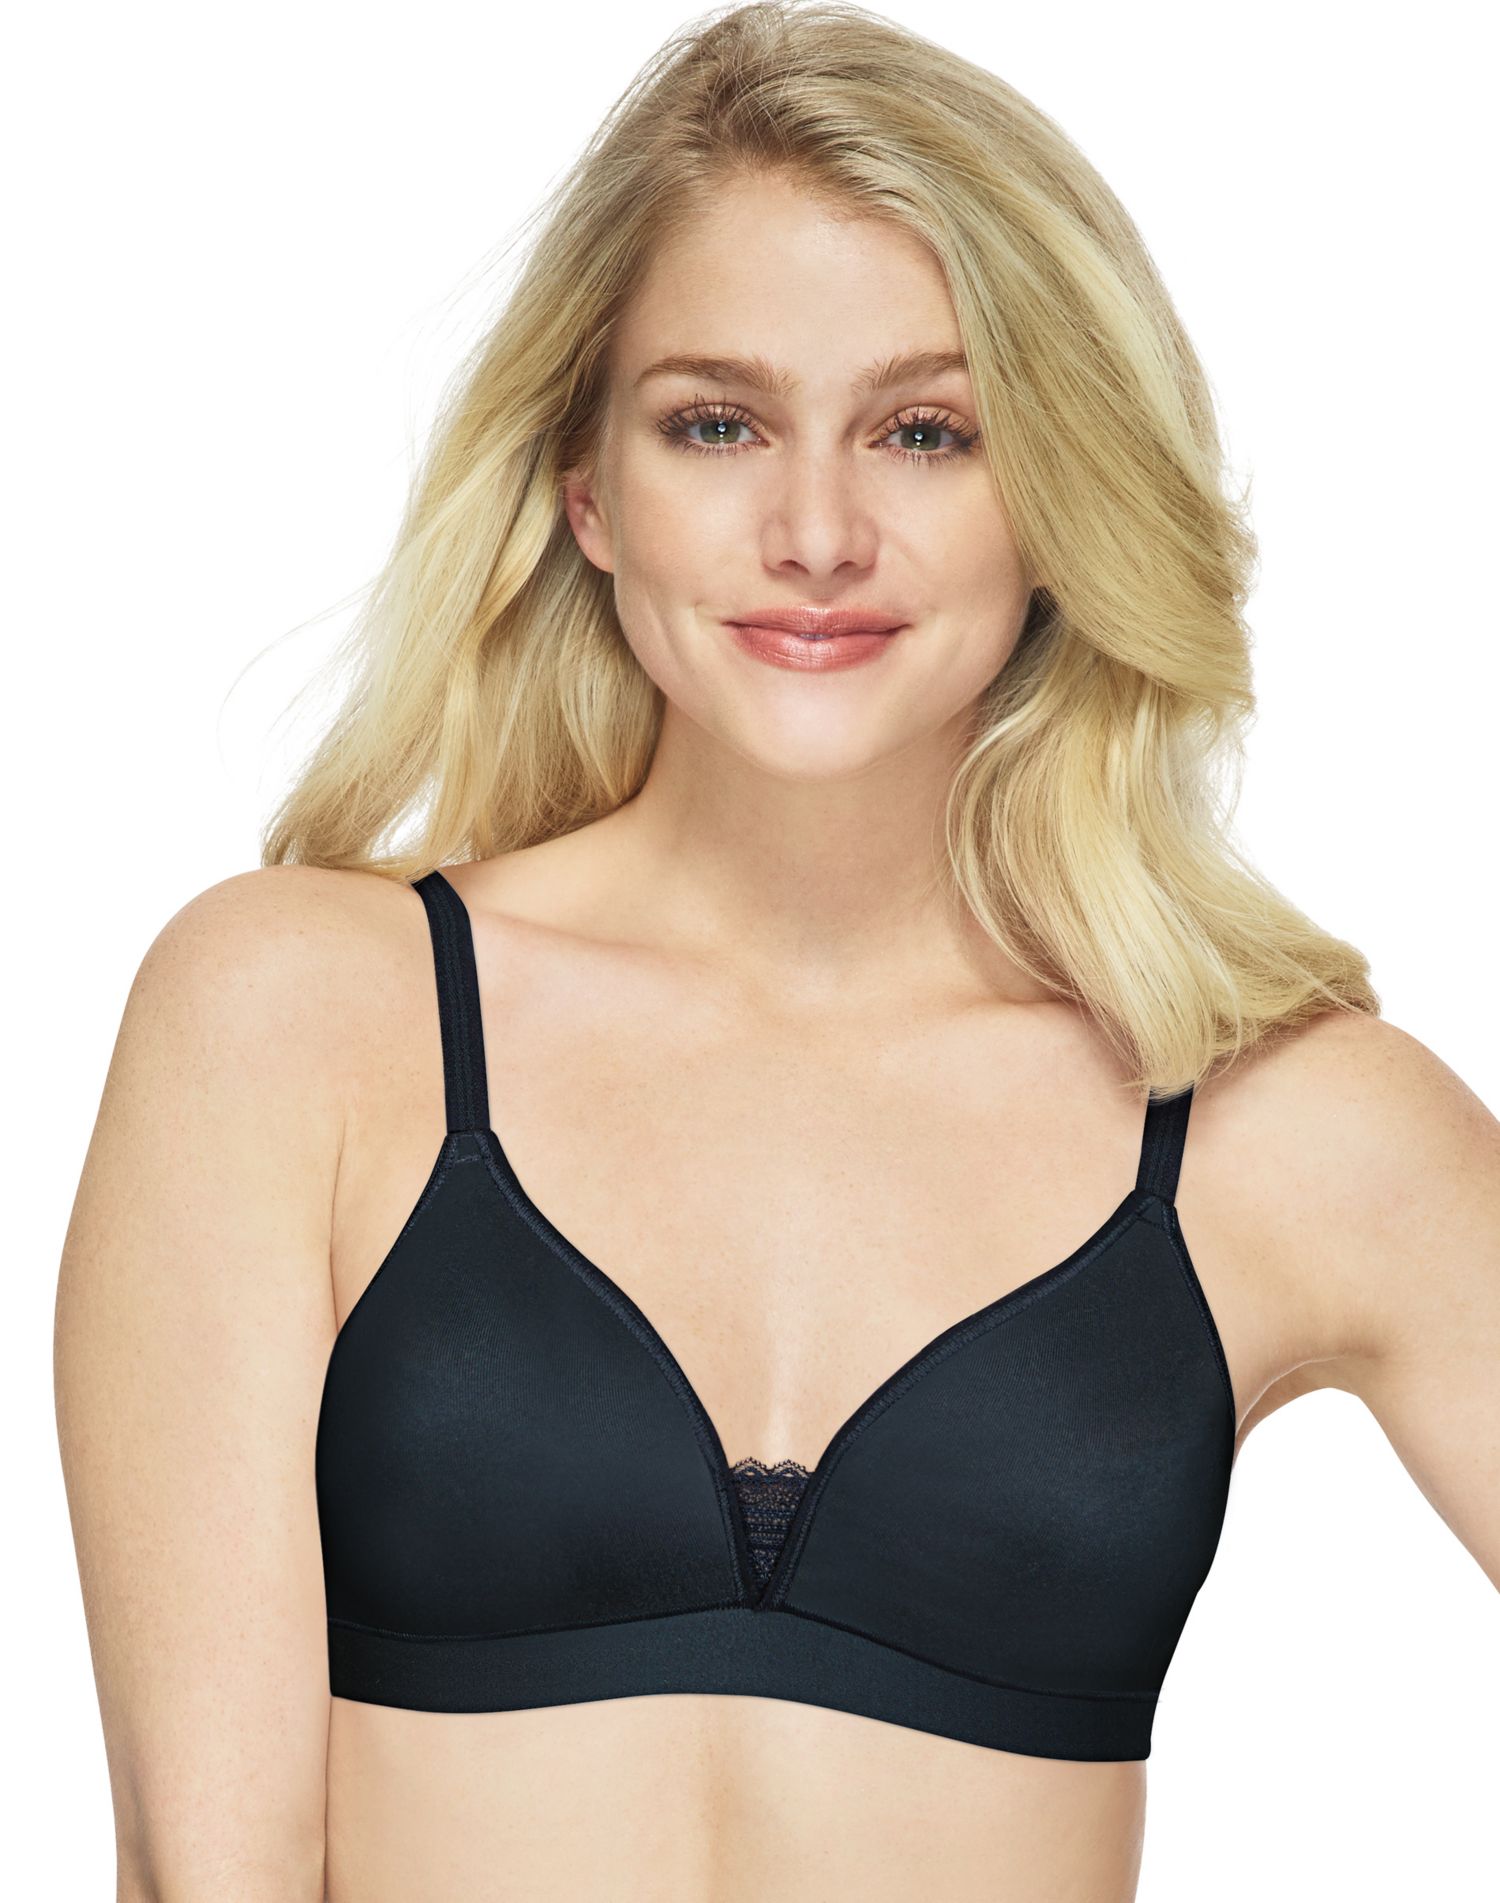 NEW WOMEN'S SIZE LARGE HANES UNDERWIRE COMFORTFLEX FIT EASYWIRE T